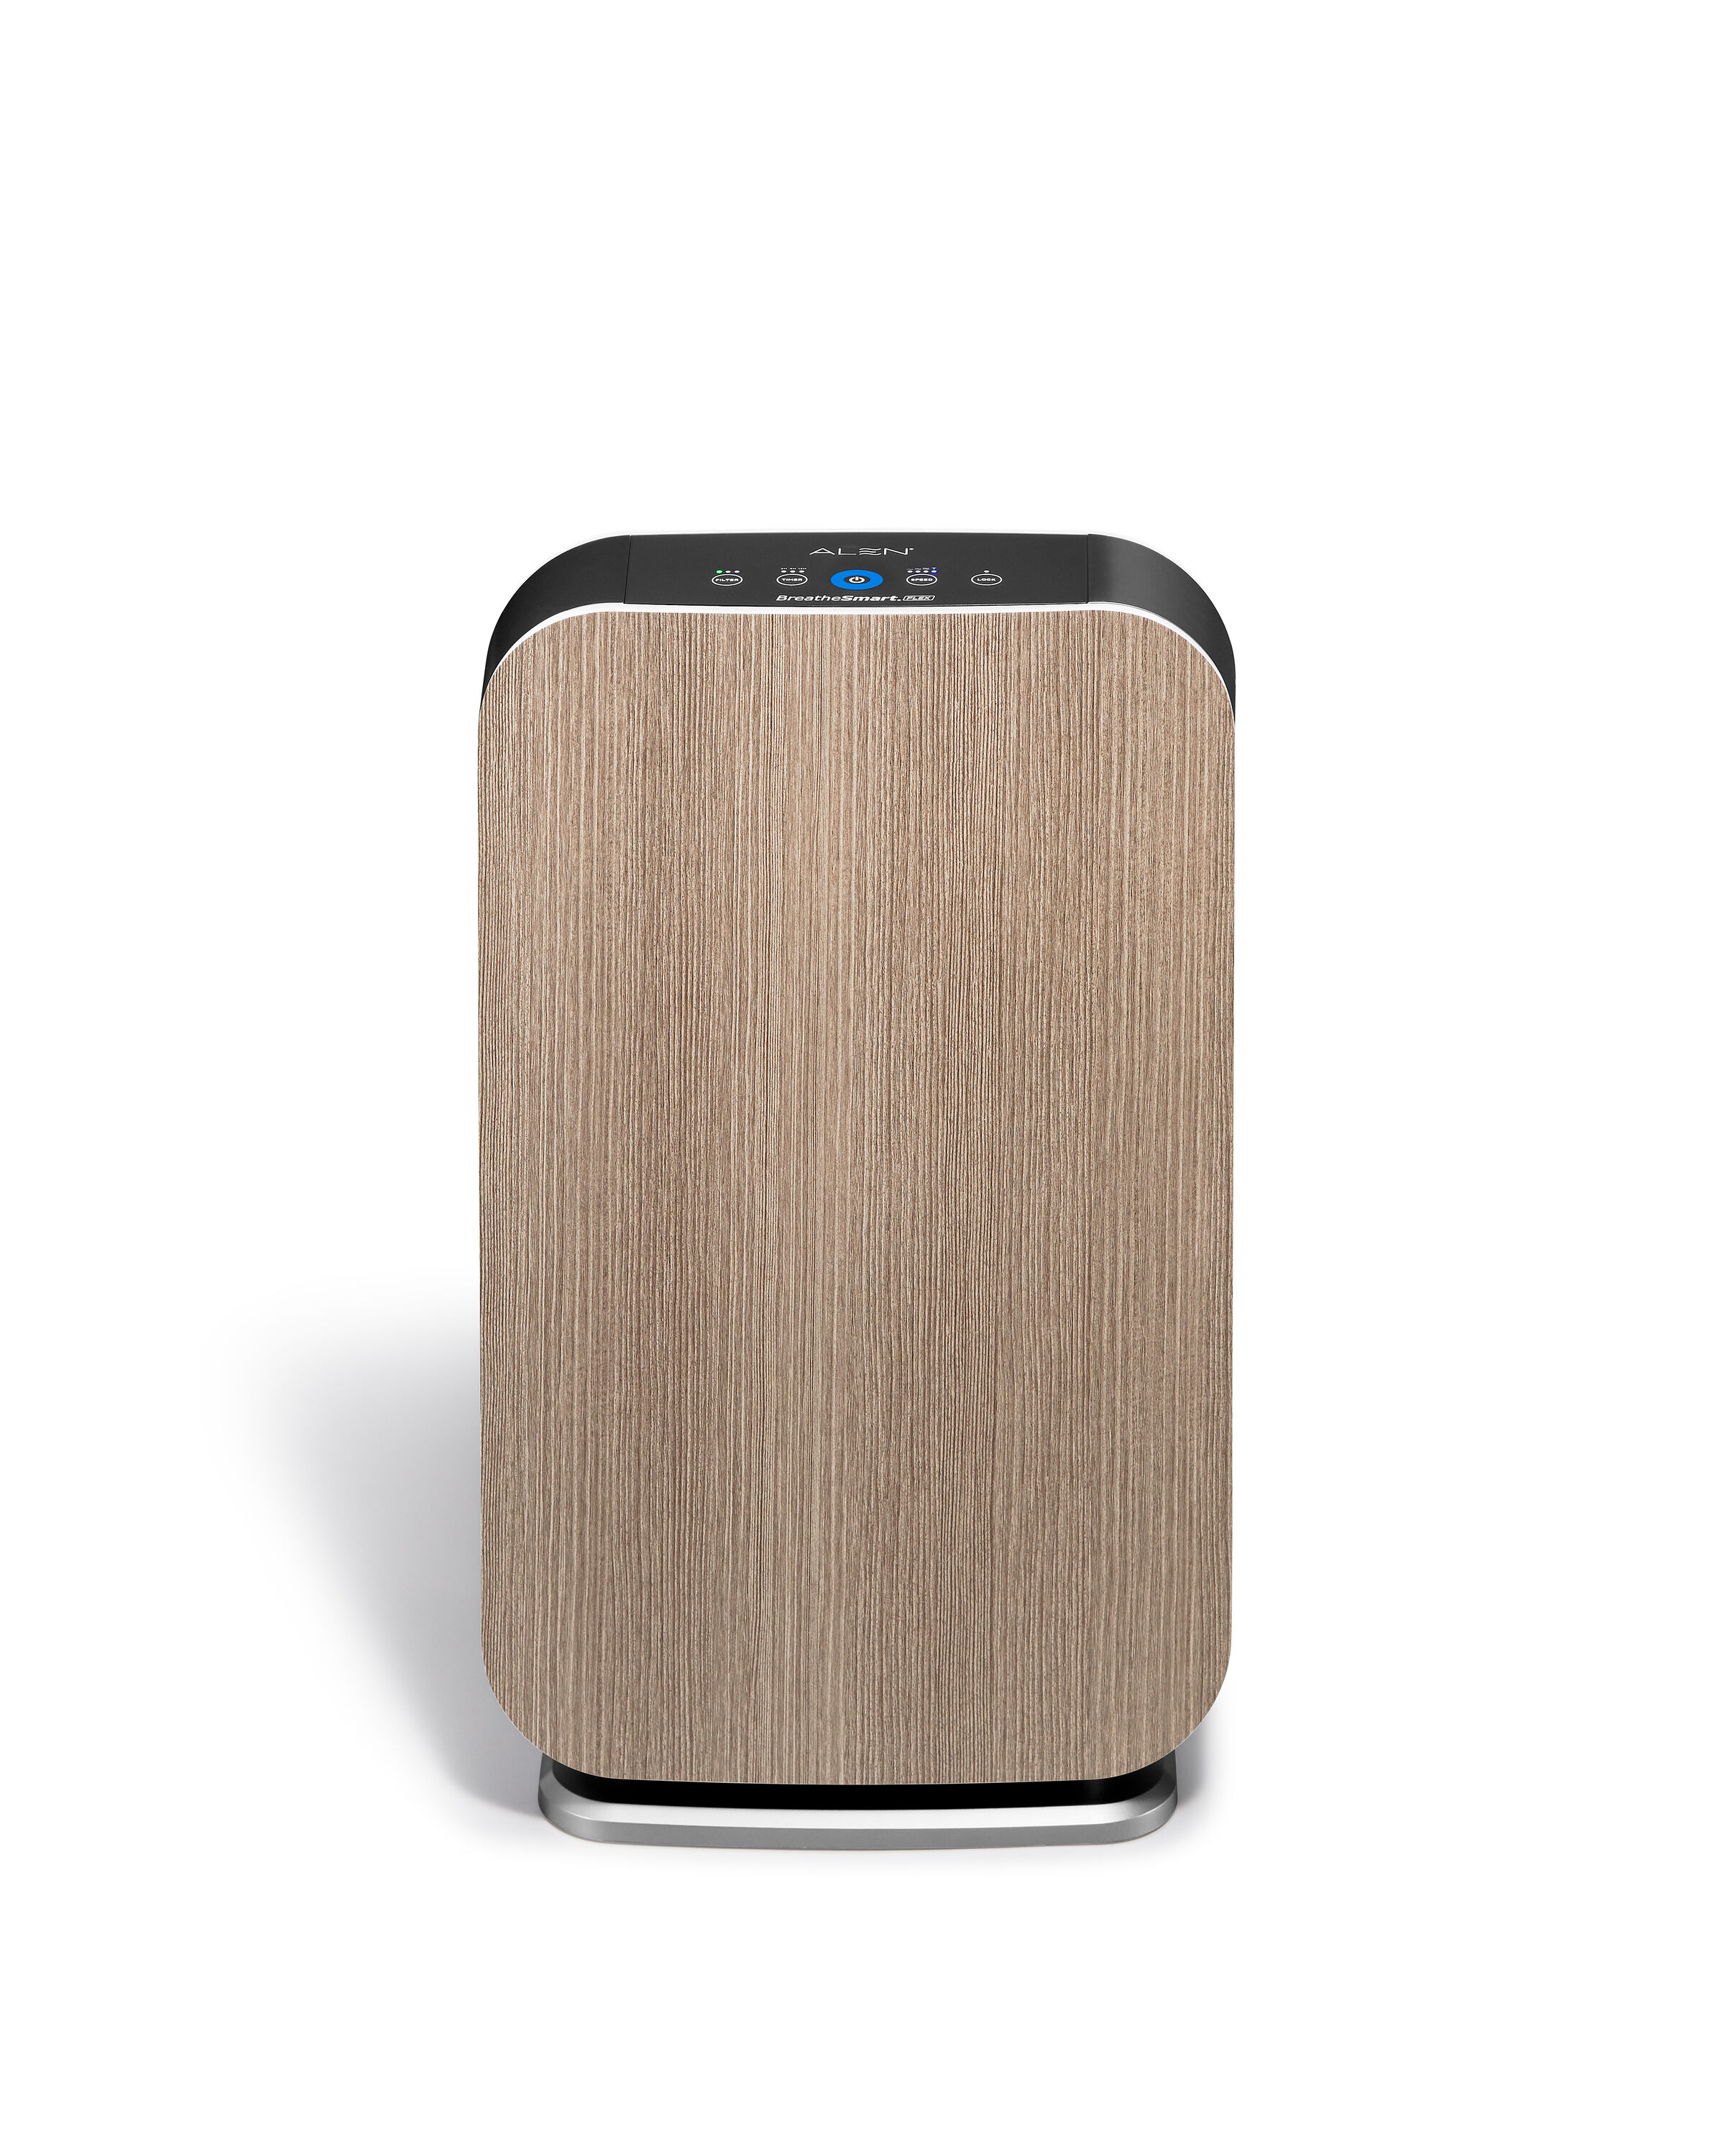 LEVOIT Air Purifier for Home Bedroom, Smart WiFi Alexa Control, Covers up  to 915 Sq.Foot, 3 in 1 Filter for Allergies, Removes Pollutants, Smoke